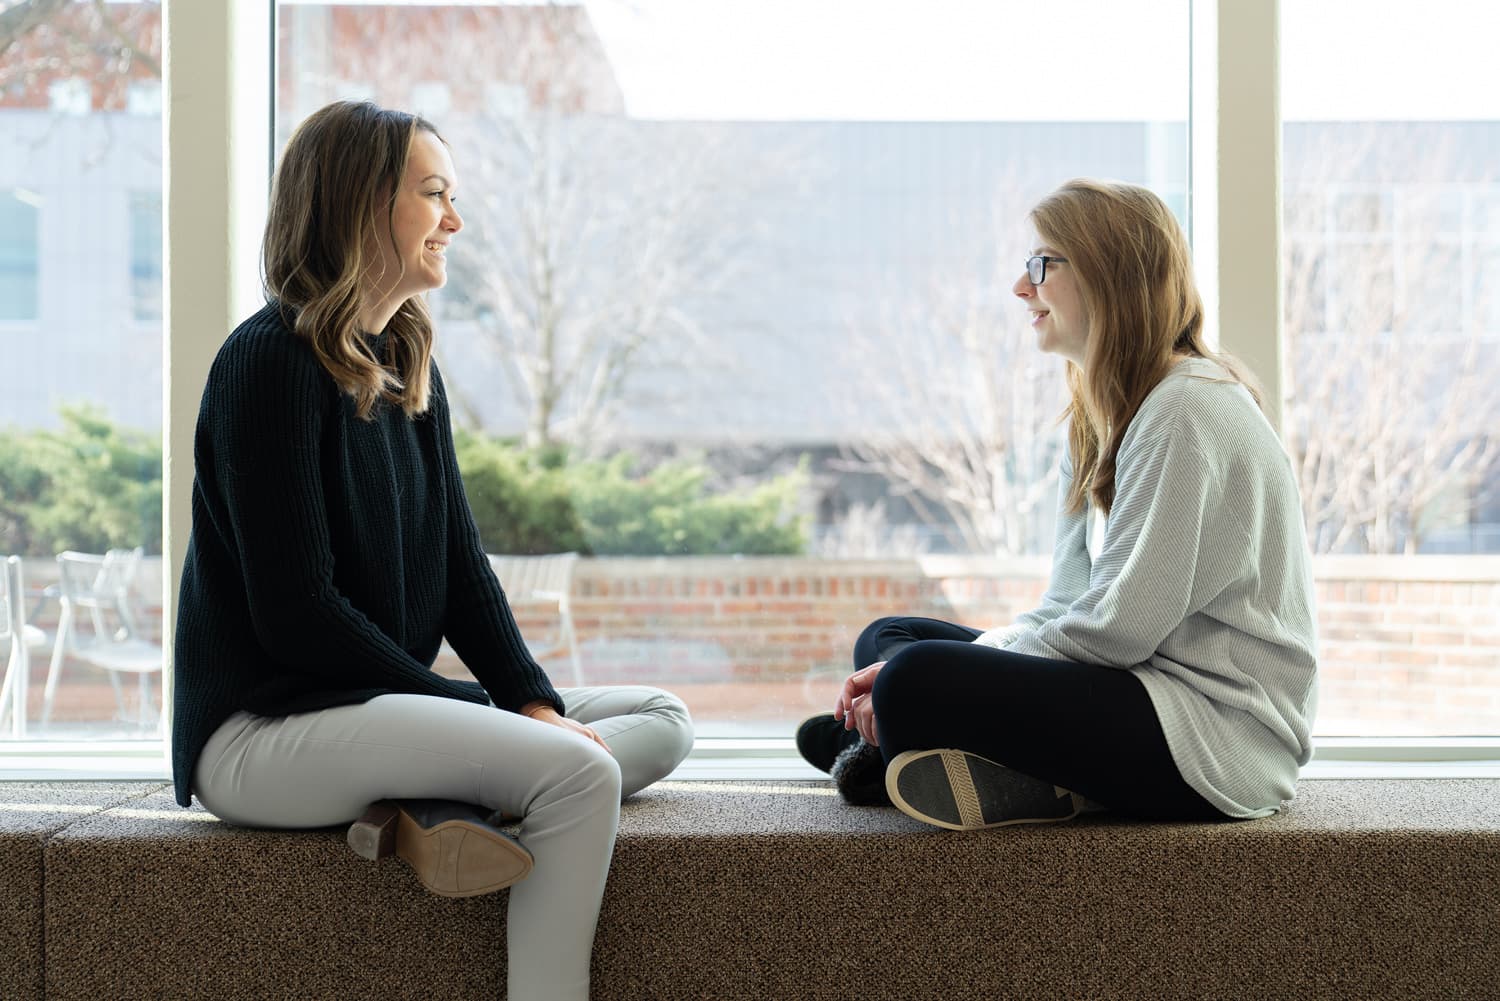  Student and advisor sitting and talking near windows 